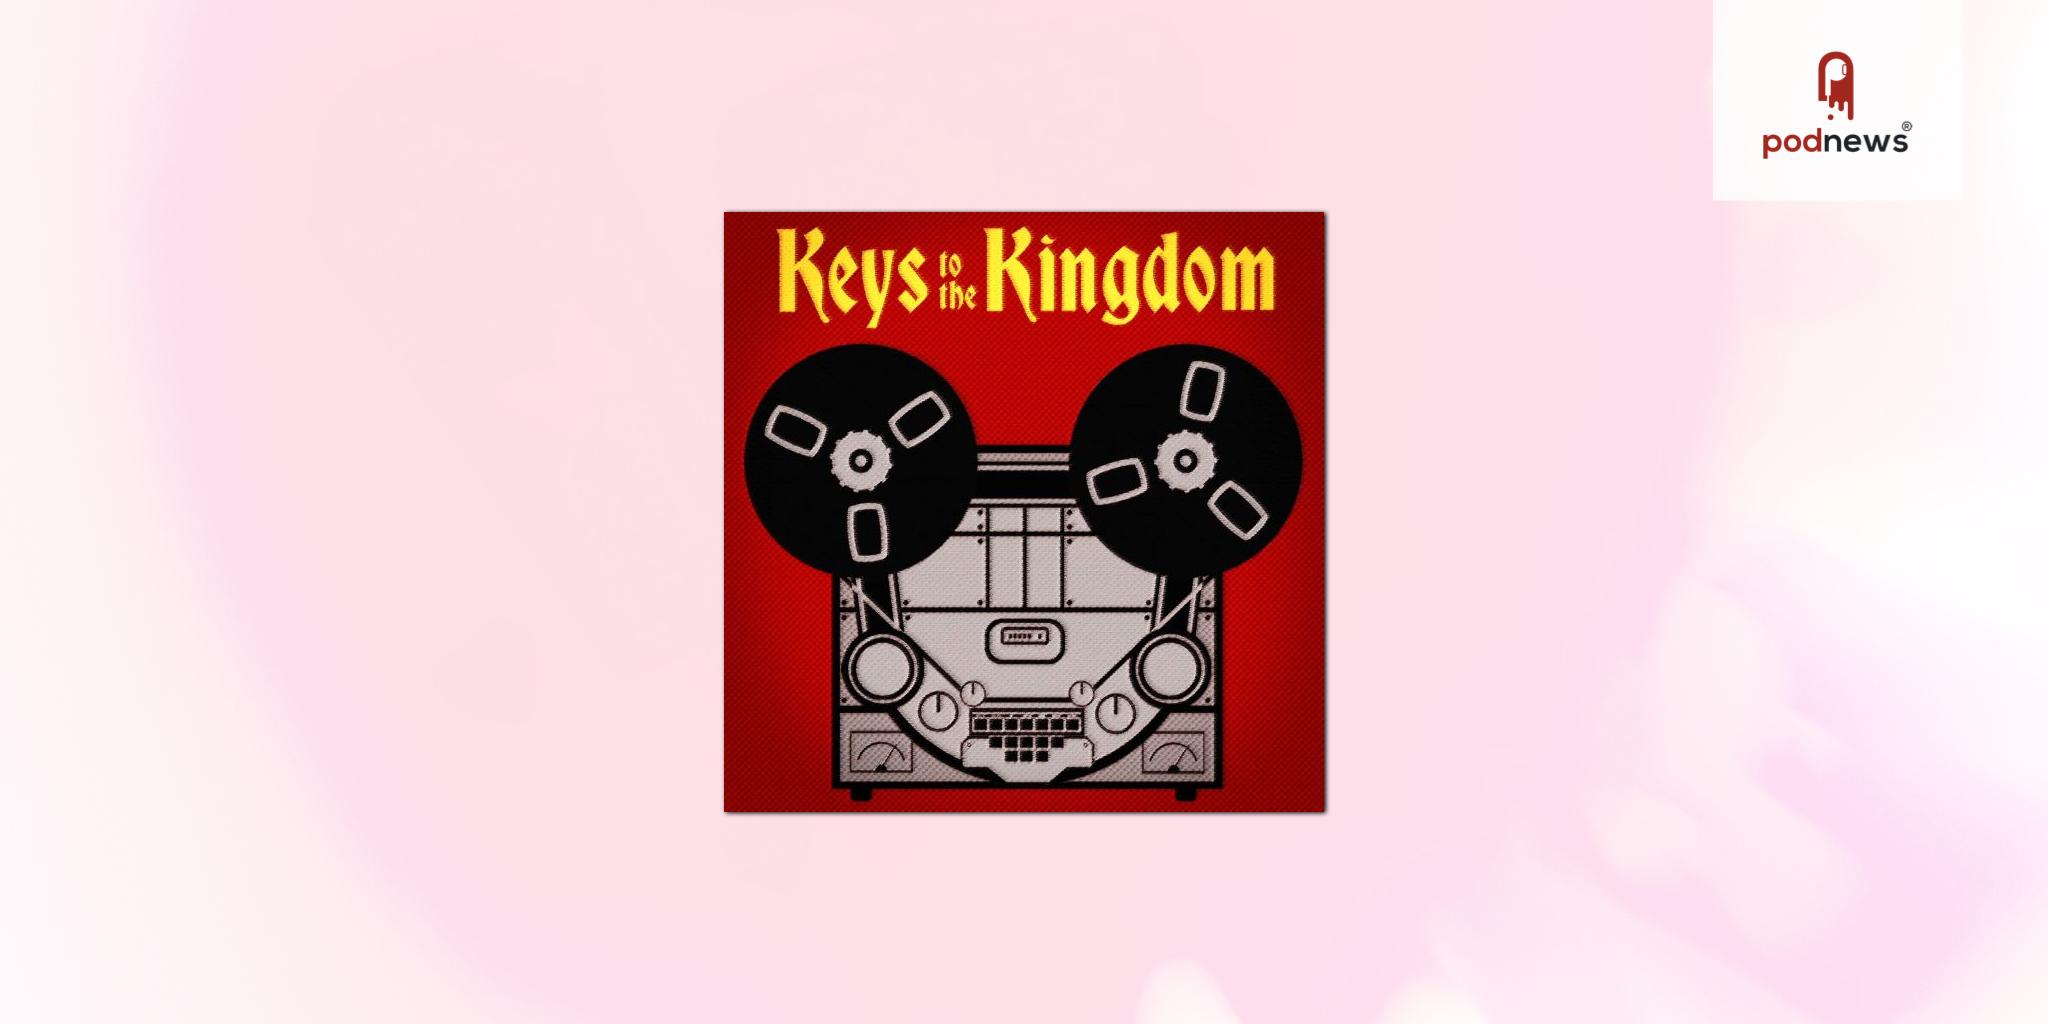 Former Disney Cast Members Reveal All In New Documentary Podcast Series “Keys to the Kingdom”